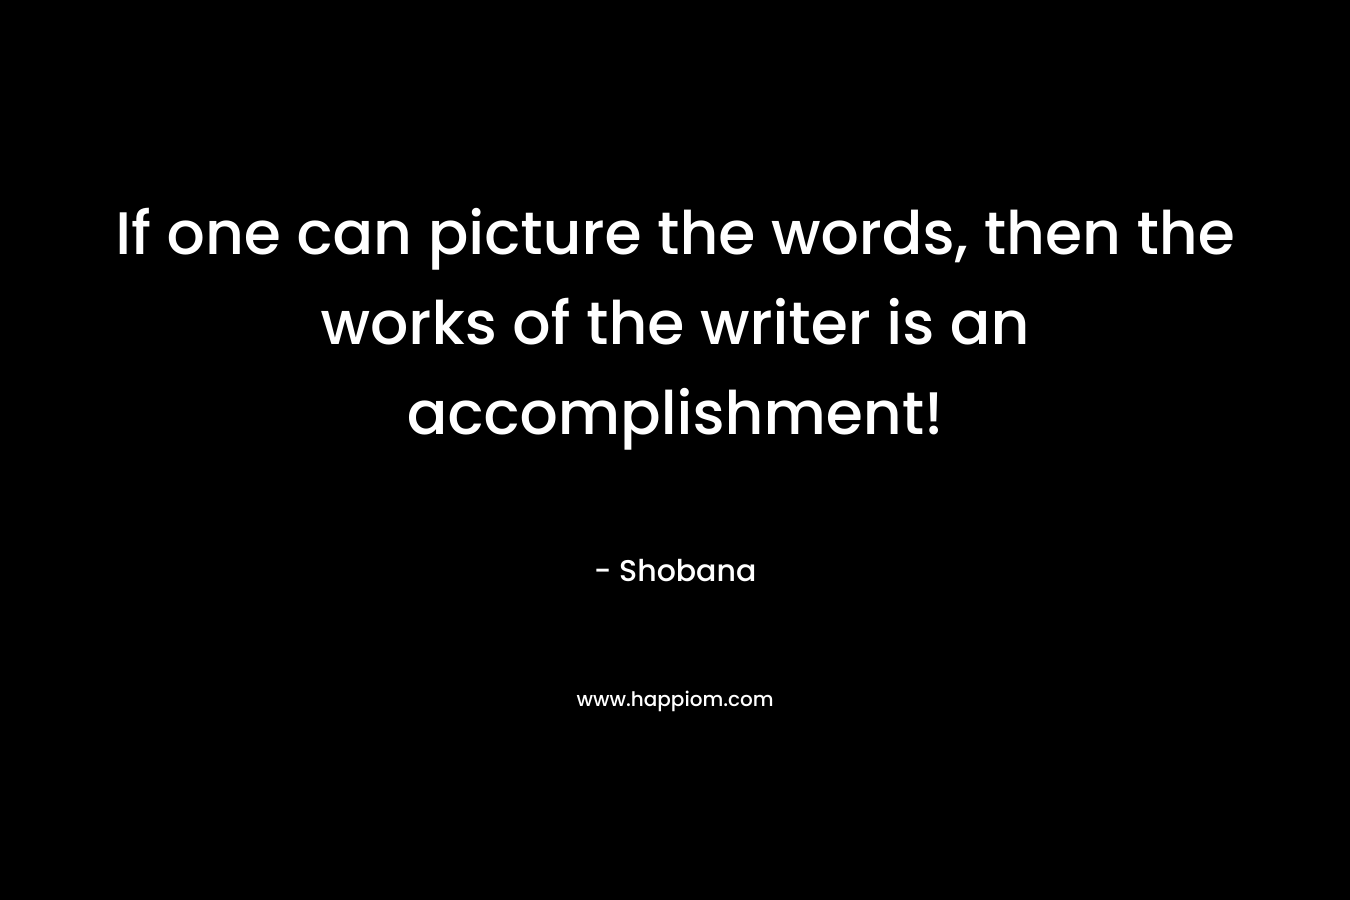 If one can picture the words, then the works of the writer is an accomplishment!